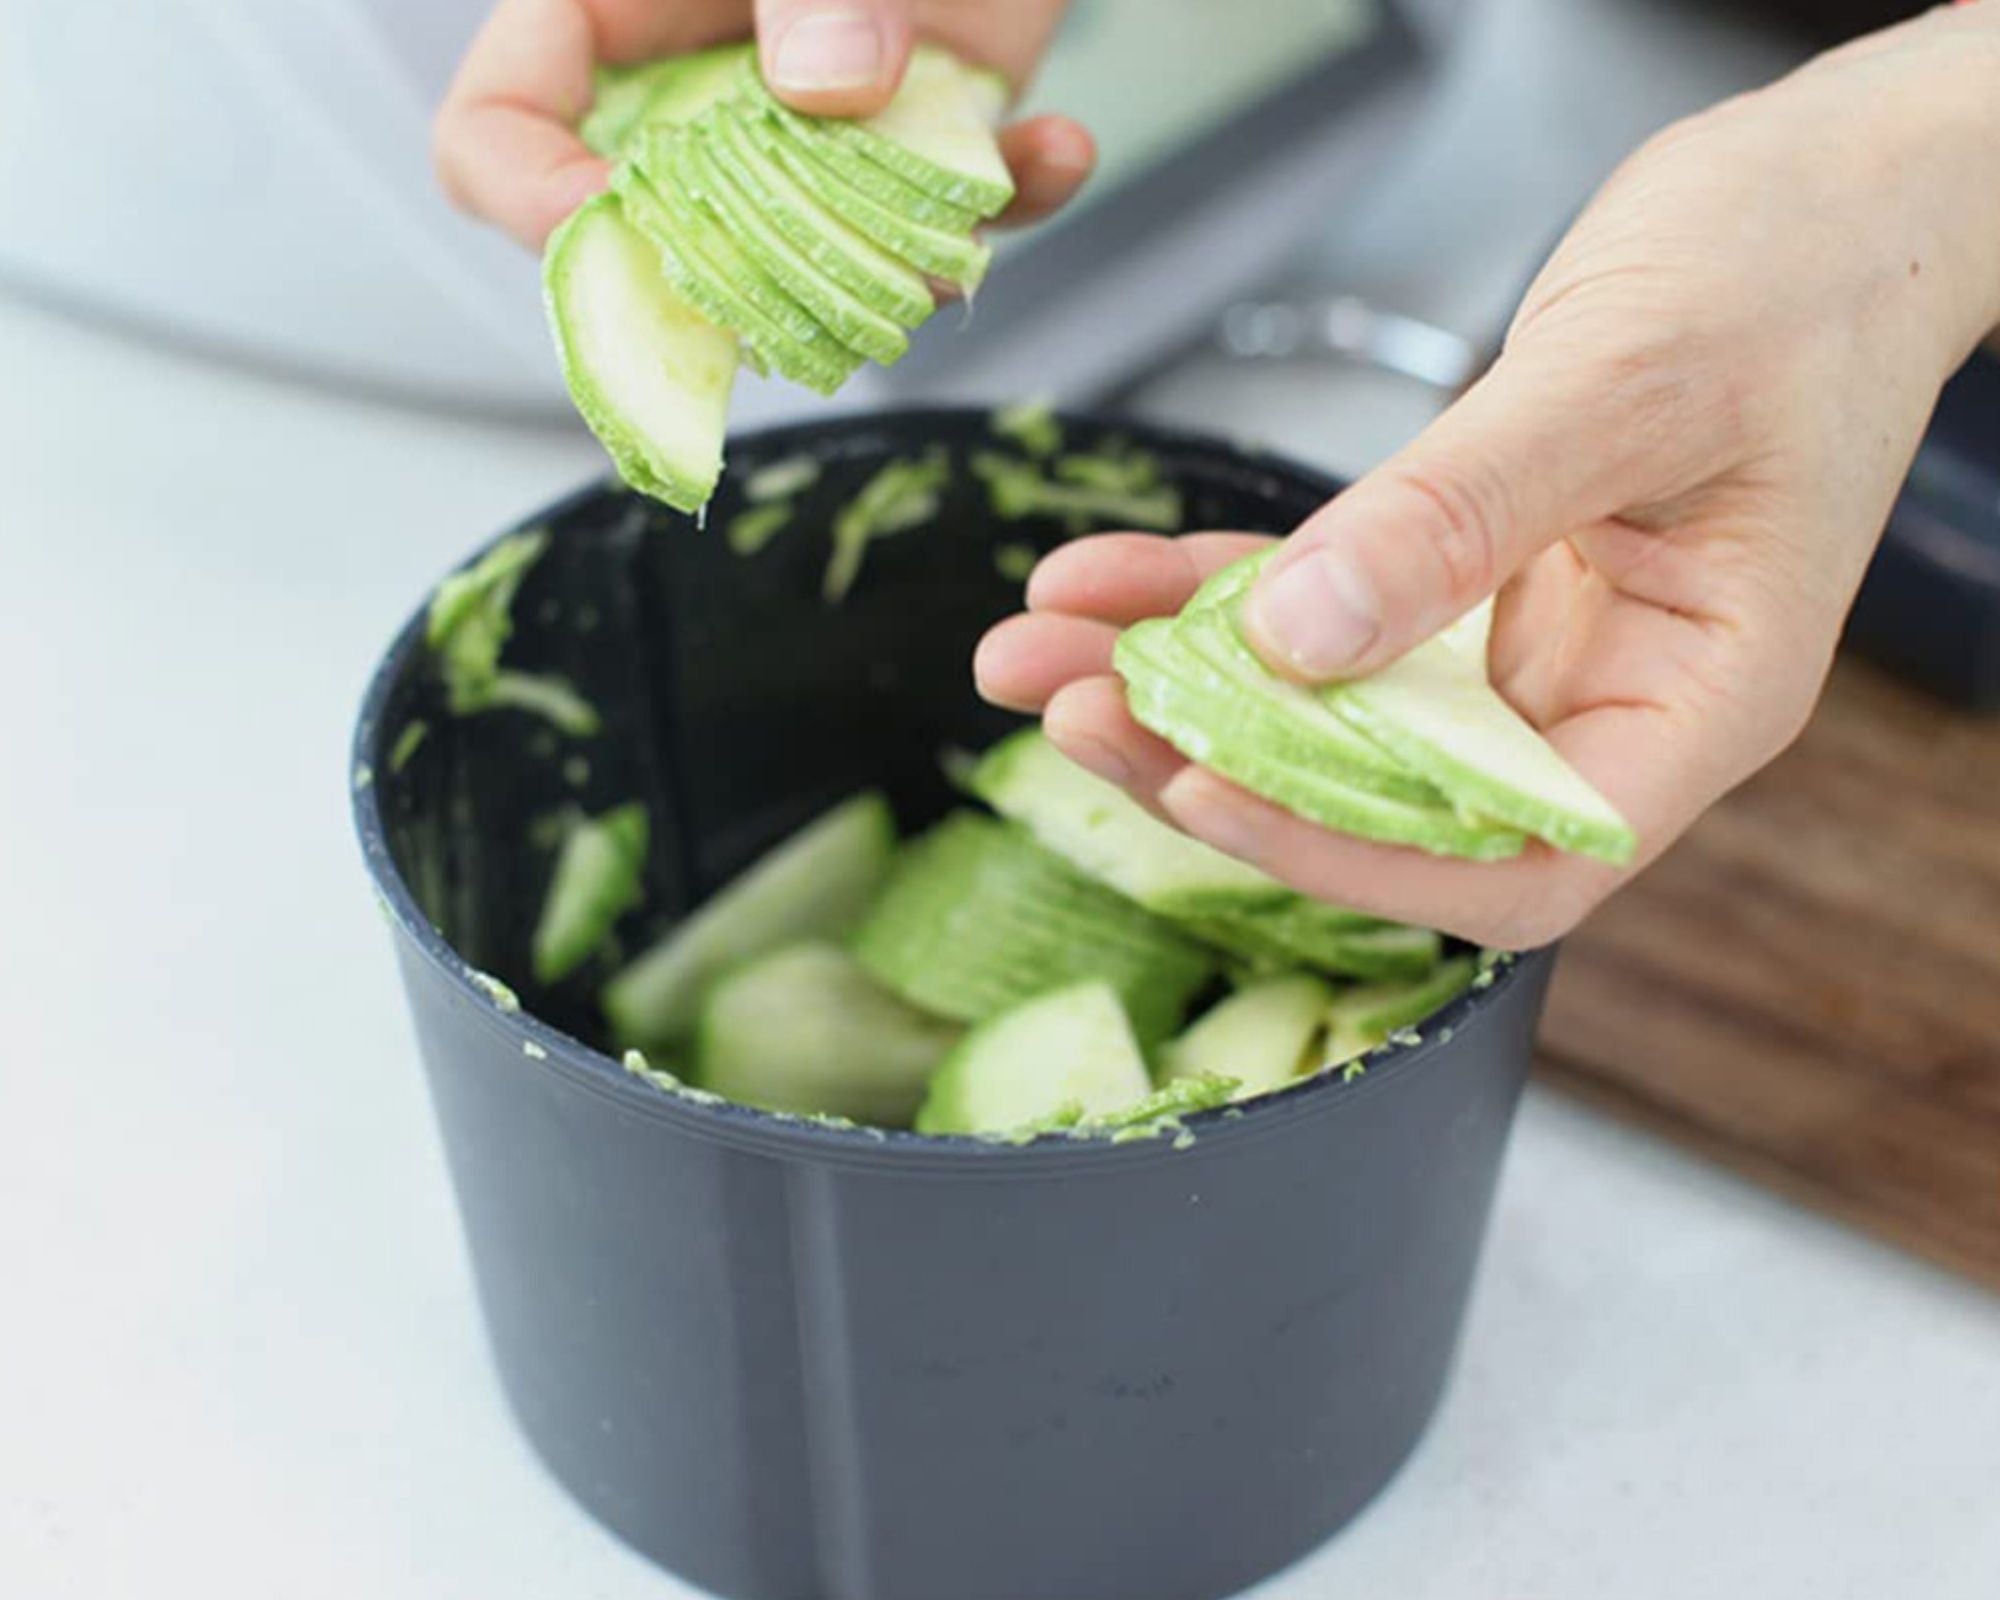 Coupix - Vegetable Cutter for Thermomix